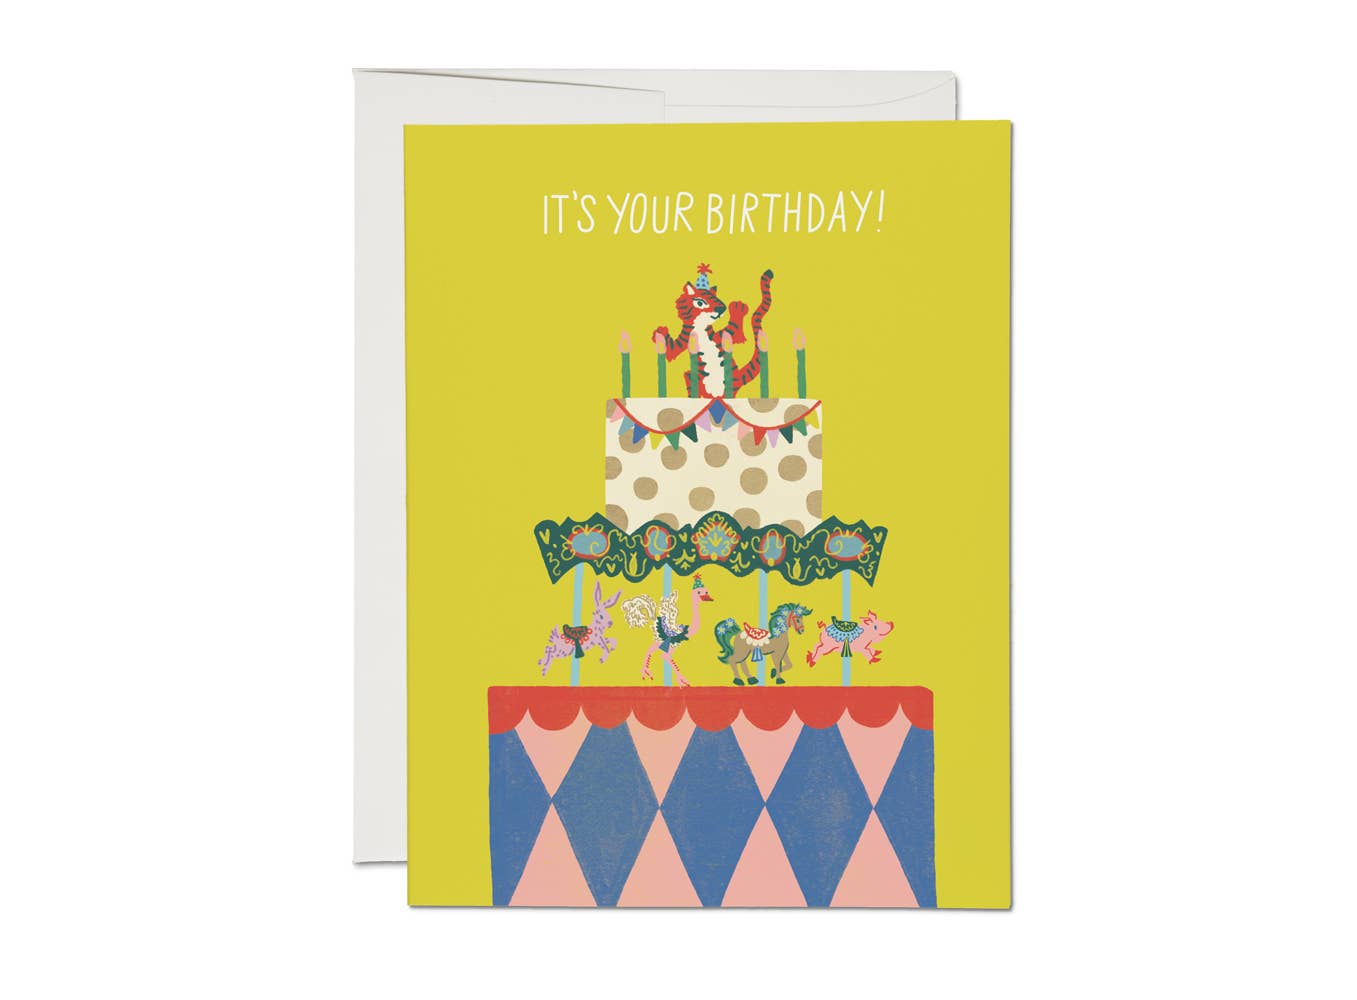 It's your birthday printed above a cake with an animal carousel beneath the cake. A fun tiger dancing on top of the cake. 